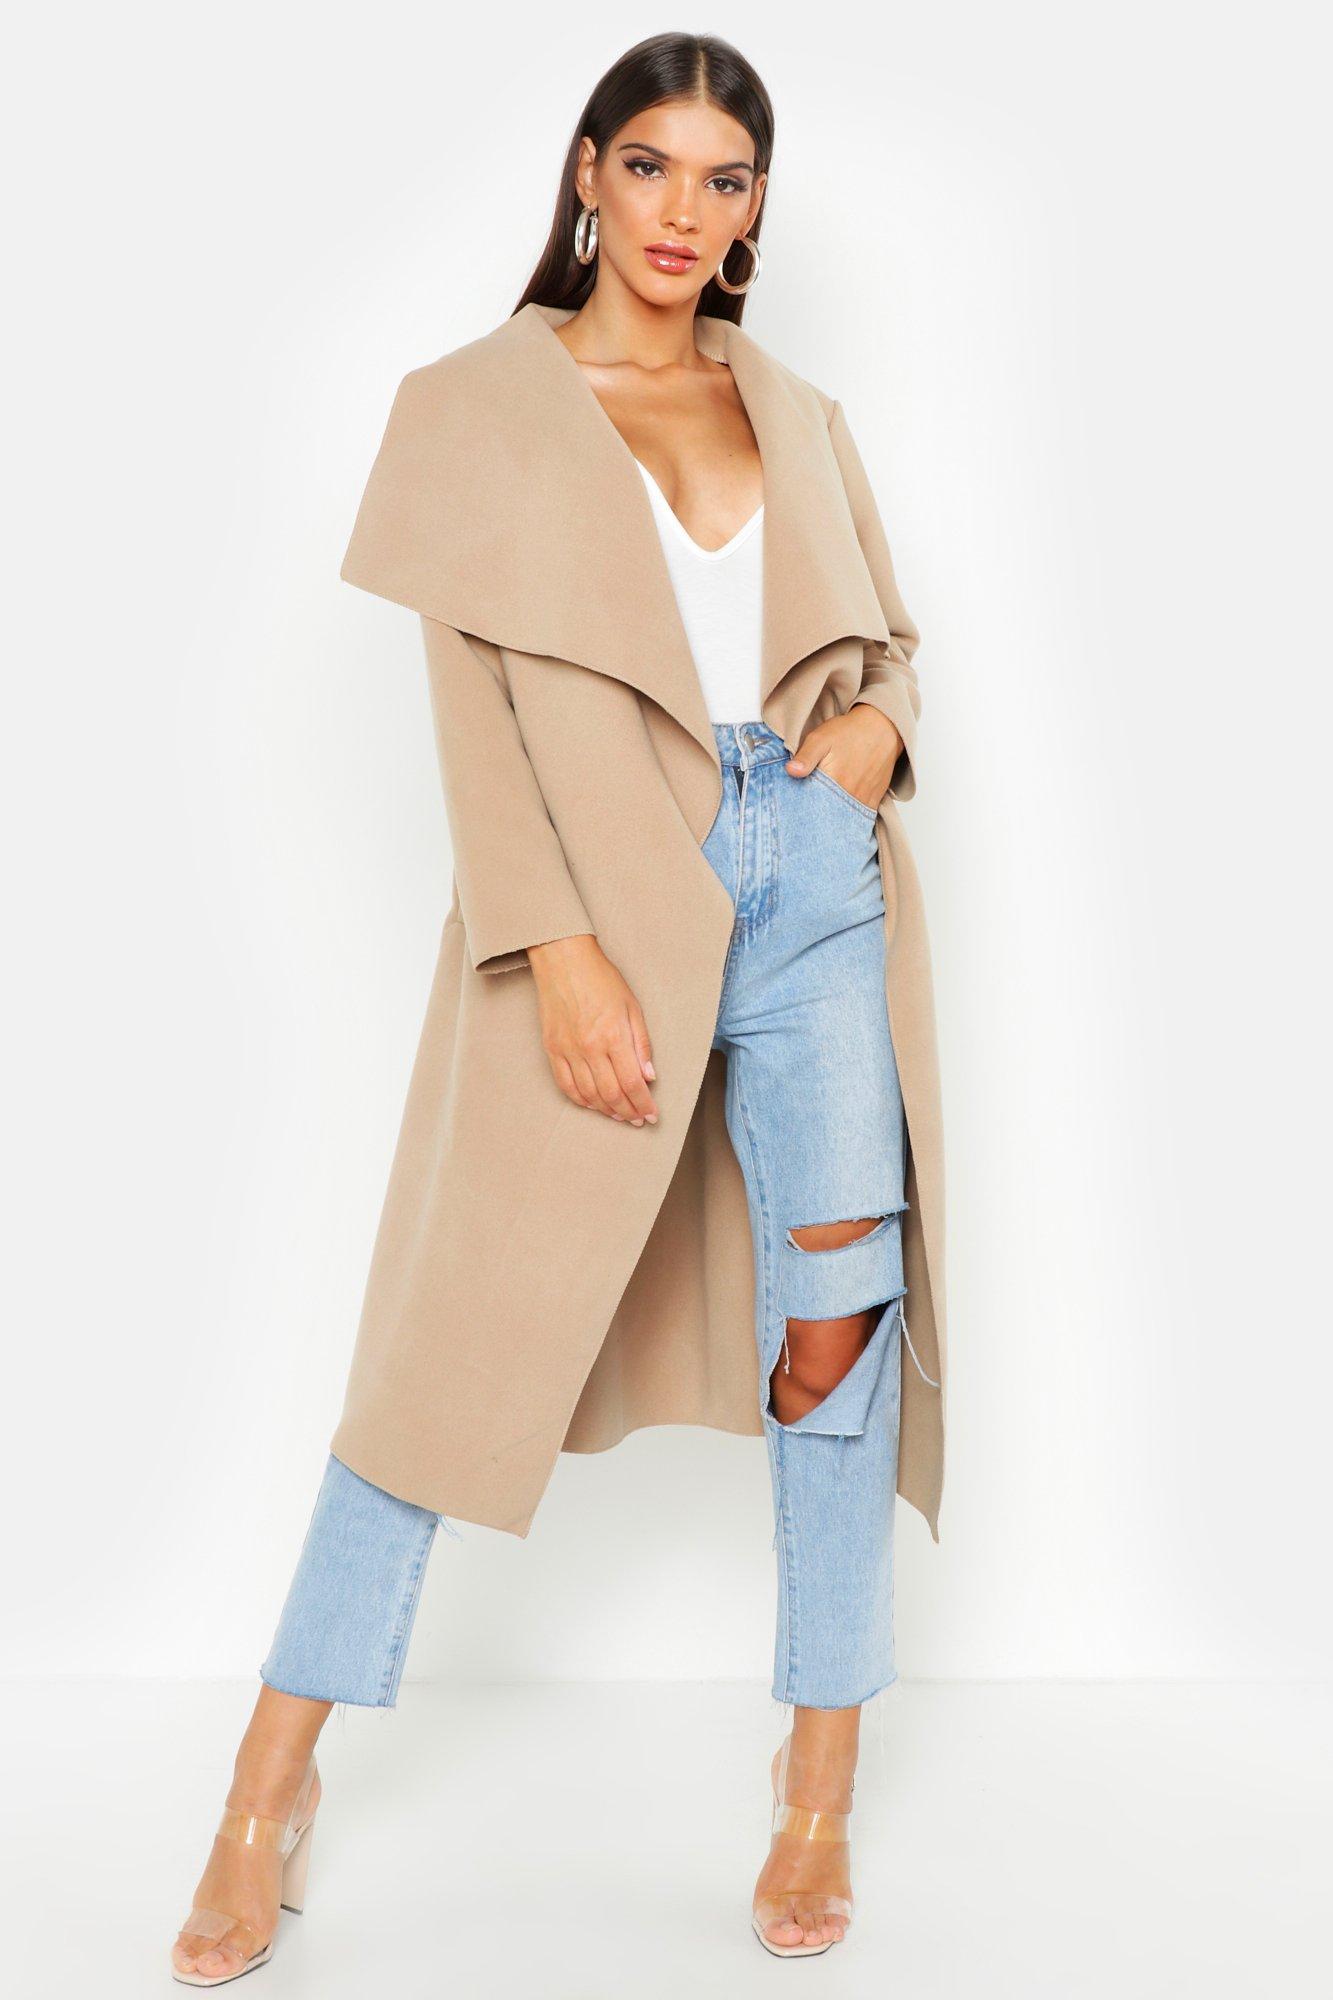 Boohoo Womens Belted Waterfall Coat in Beige (Natural) - Lyst